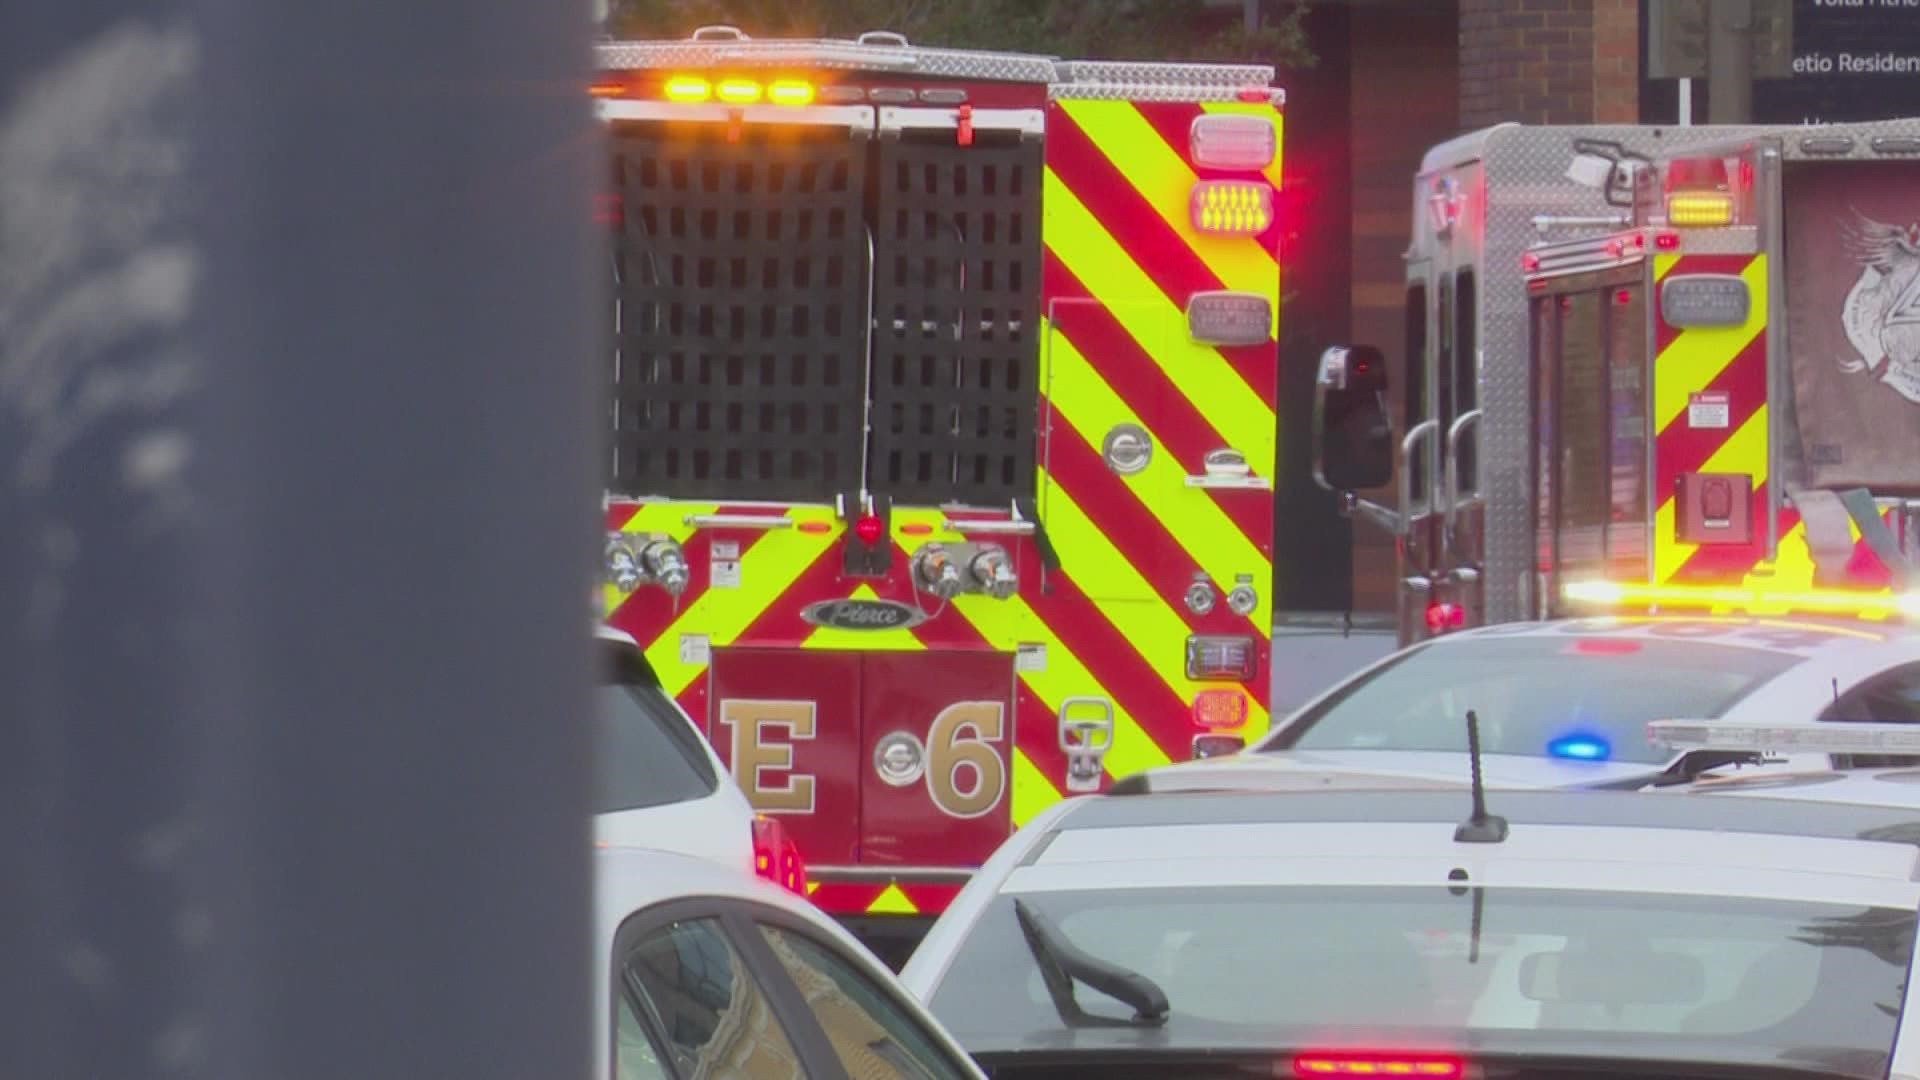 A Plano Fire Department engine that was reportedly stolen from a manufacturers facility has been found in Dallas, officials say.